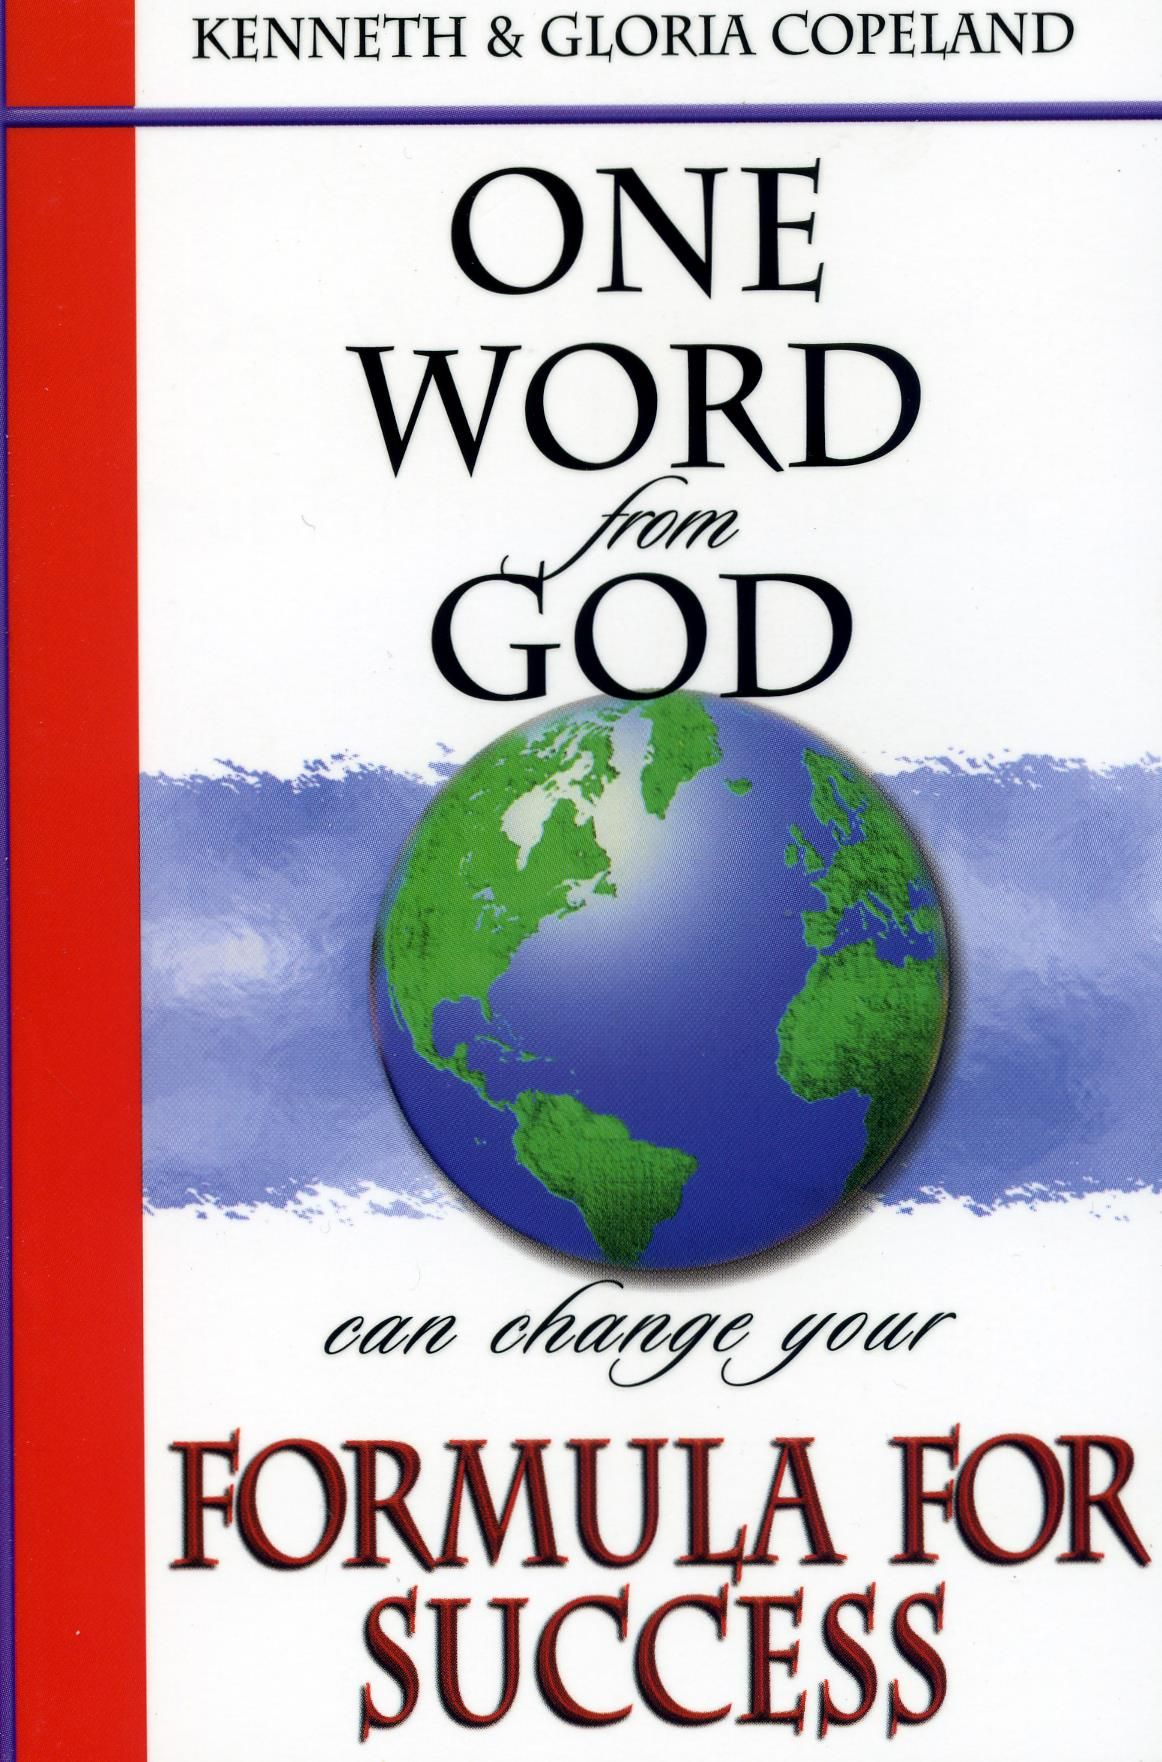 K. & G. Copeland: One Word from God can change your Formula for Success